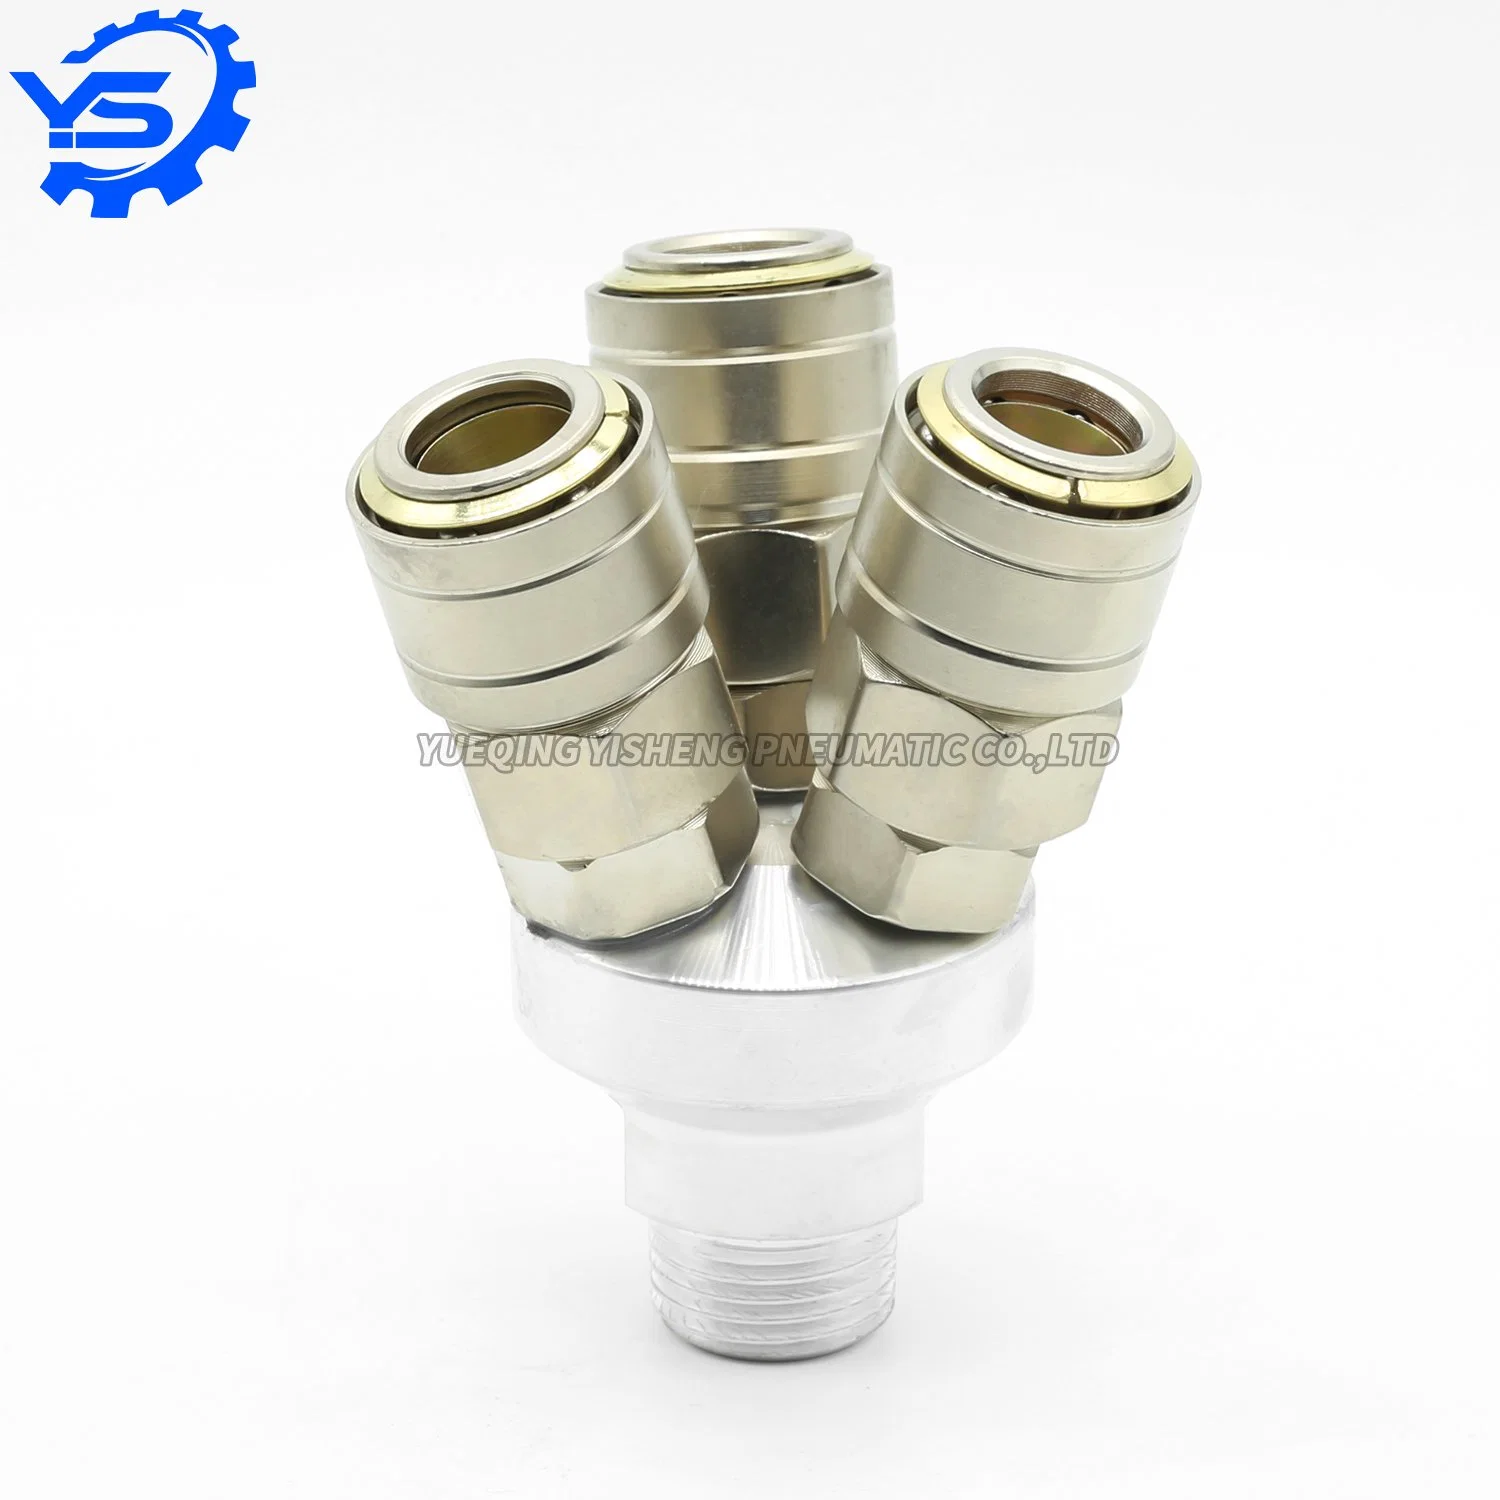 Pneumatic C-Type Air Pump Air Pipe Quick Connector Round Two Three Way Quick Coupling Connector